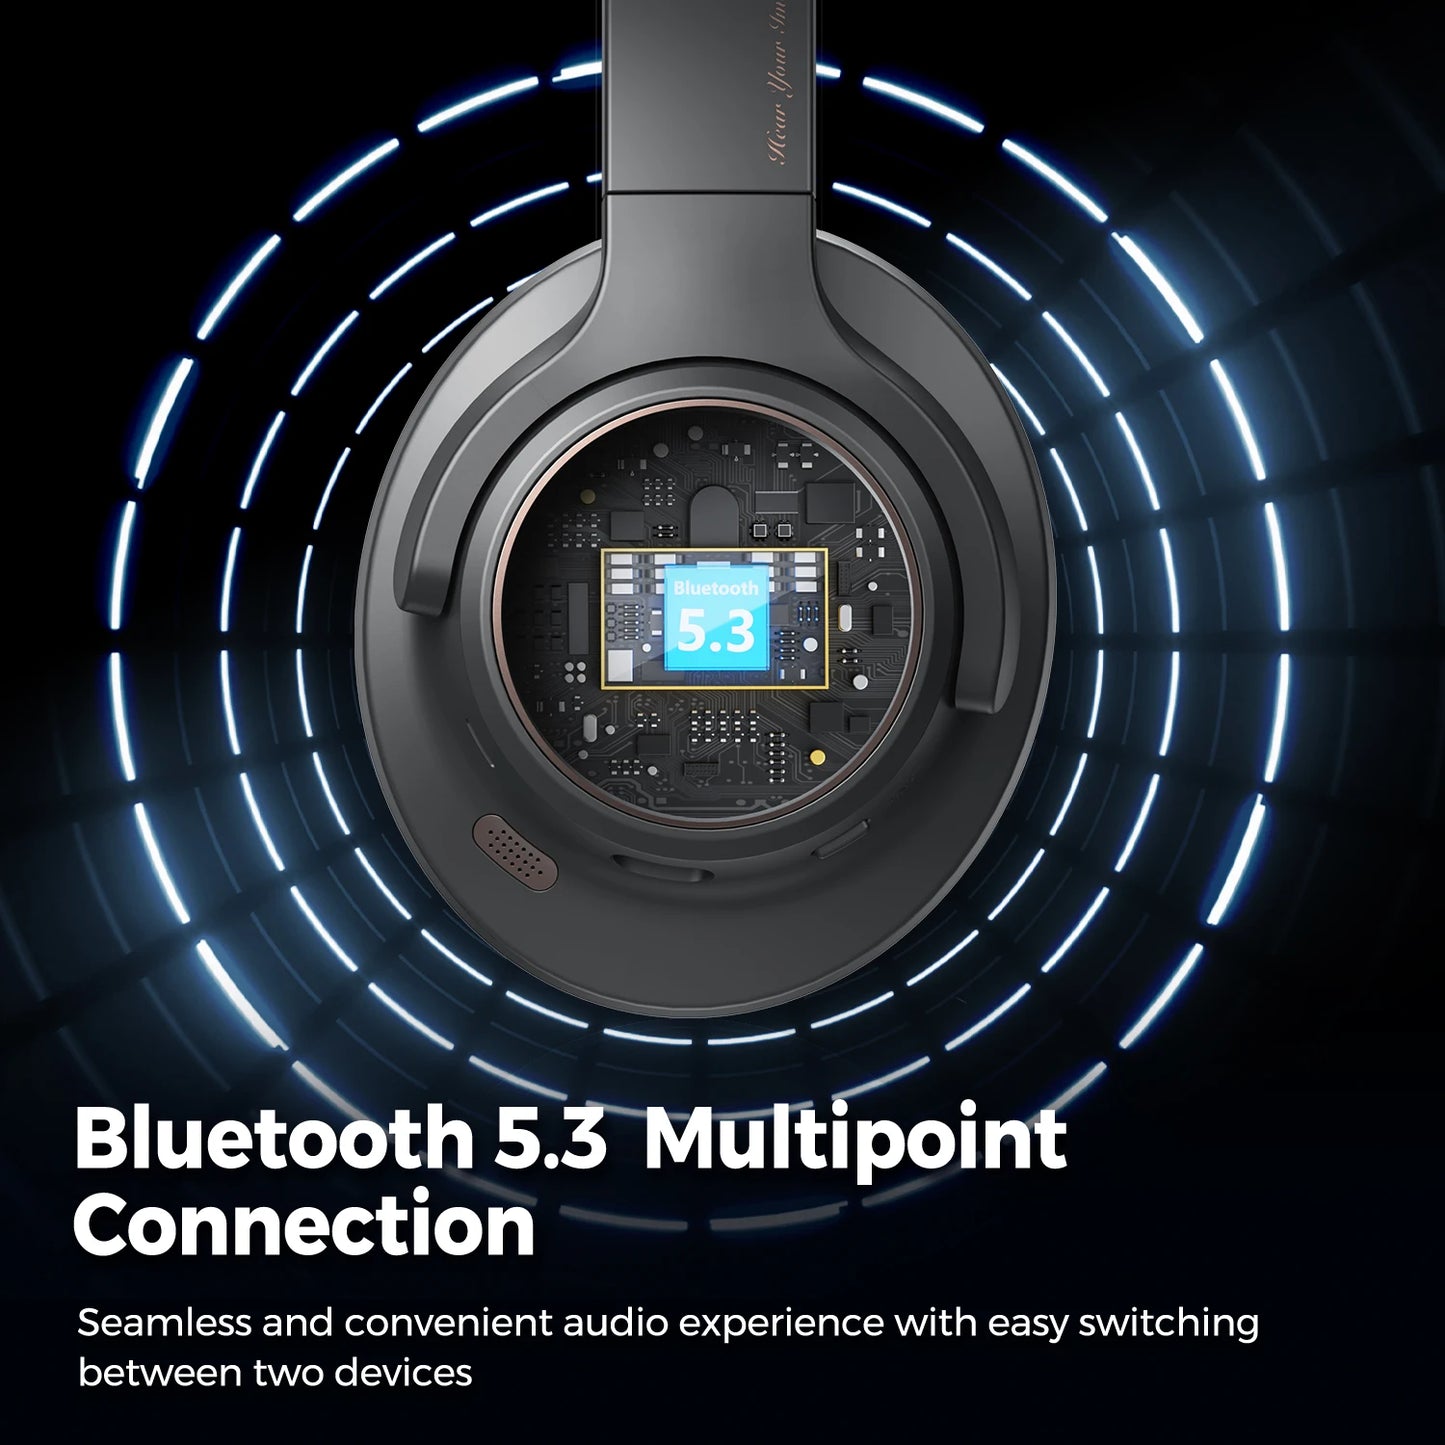 Space Headphones Bluetooth 5.3 Hybrid Active Noise Cancelling Wireless Headphone,123H Play,Mic,Multipoint Connection